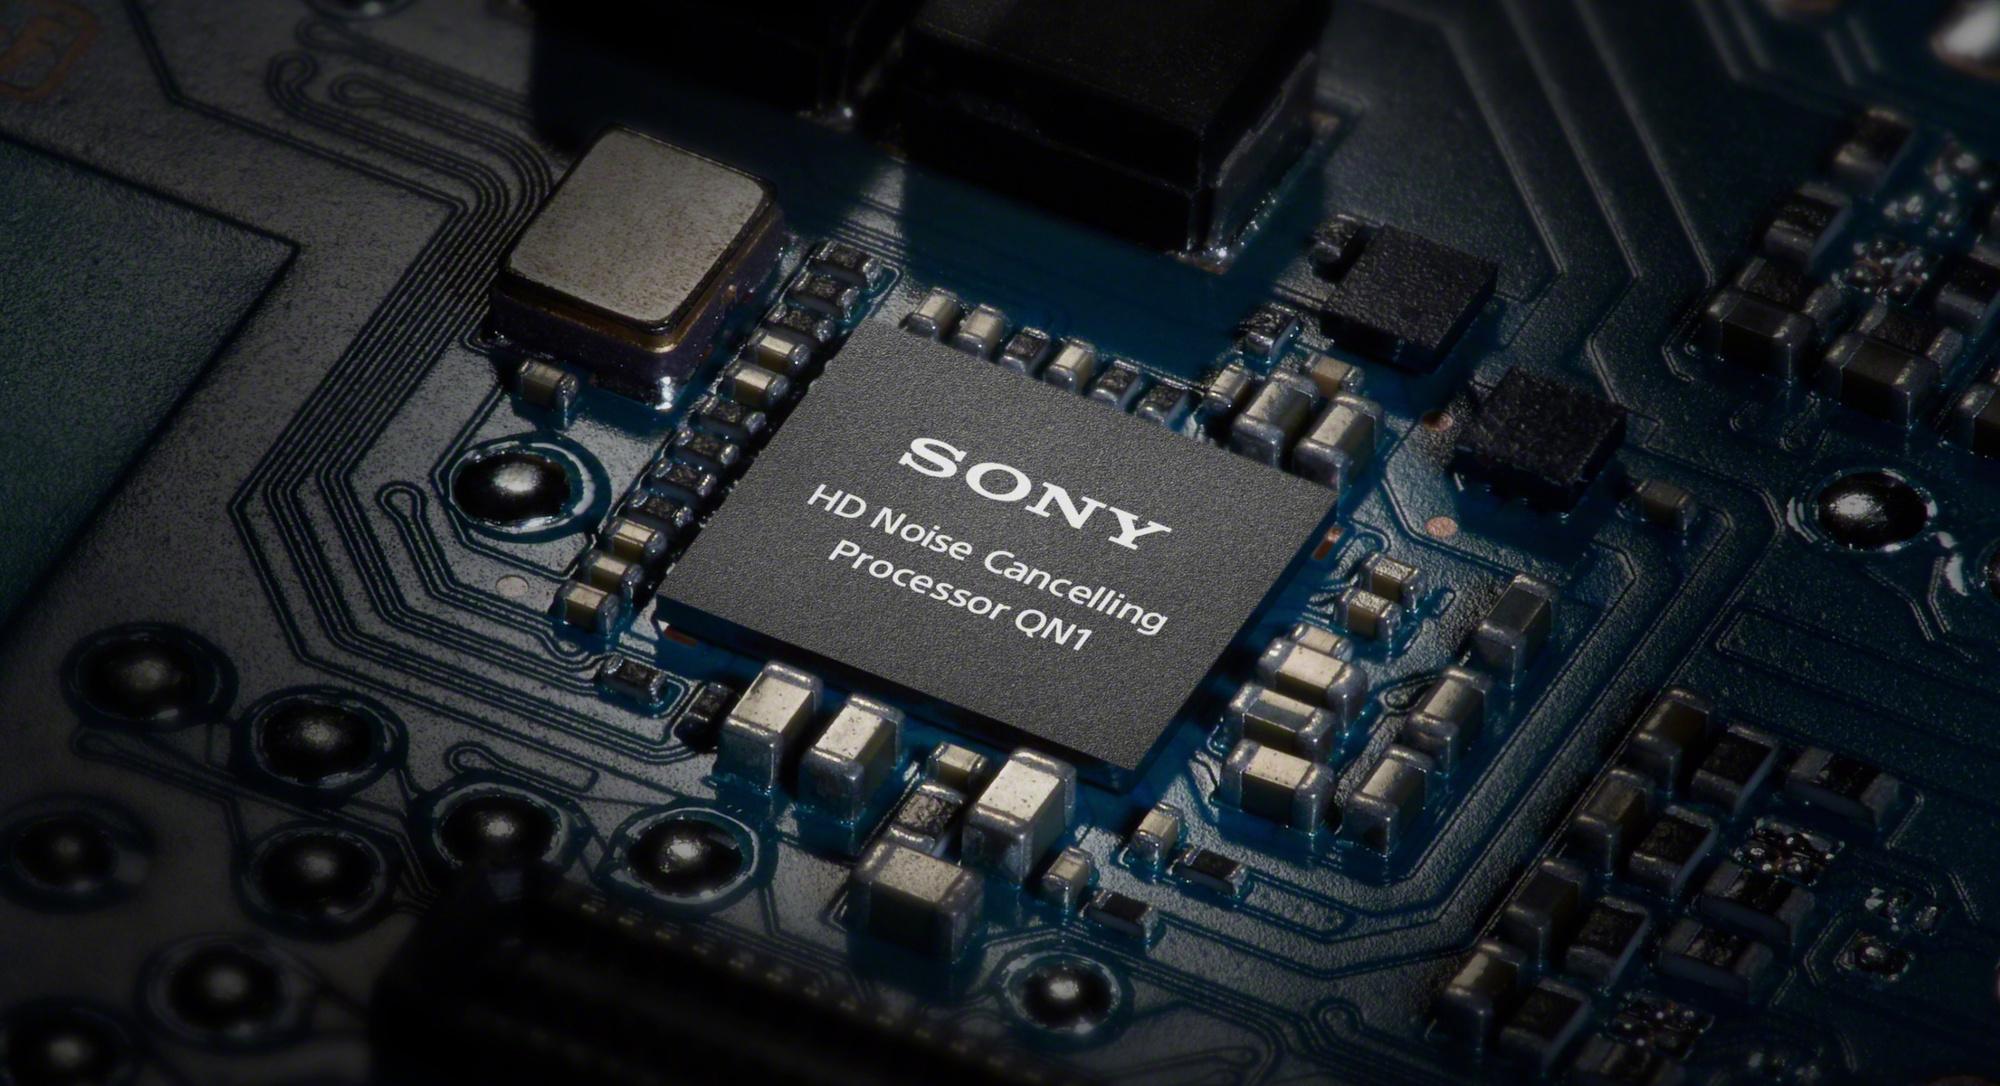 Sony's HD Noise Cancelling QN1-processor.